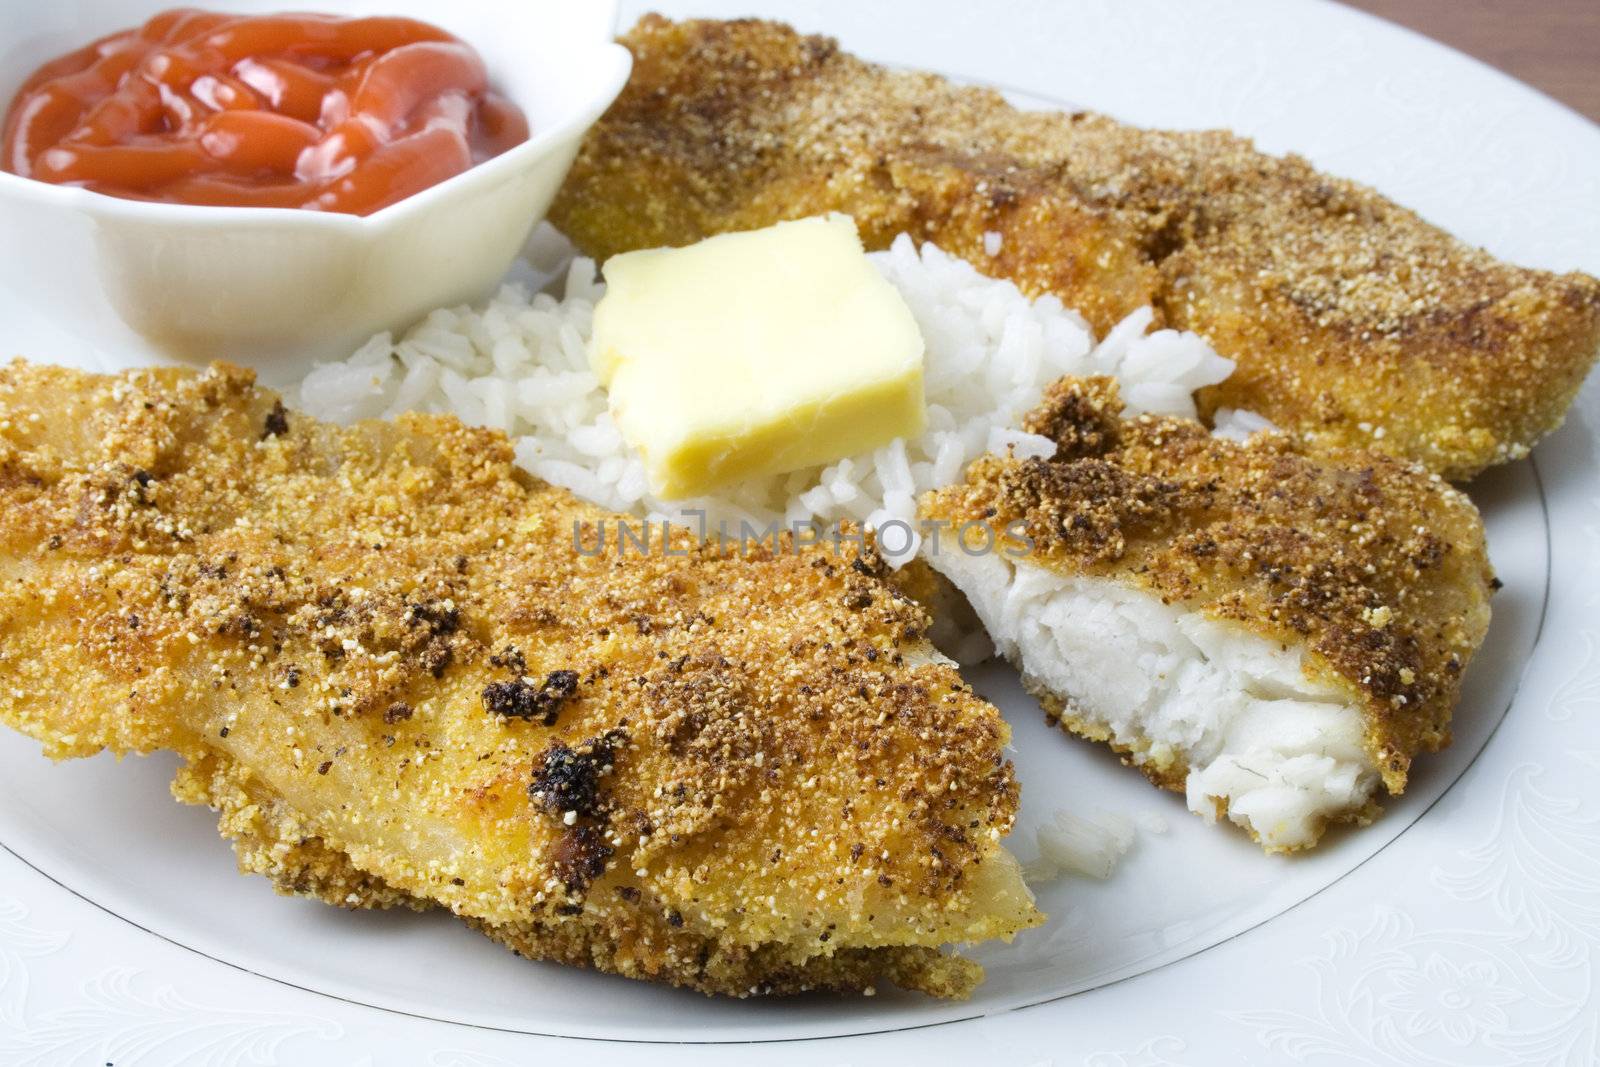 Fried fish with ketchup ready to eat or serve